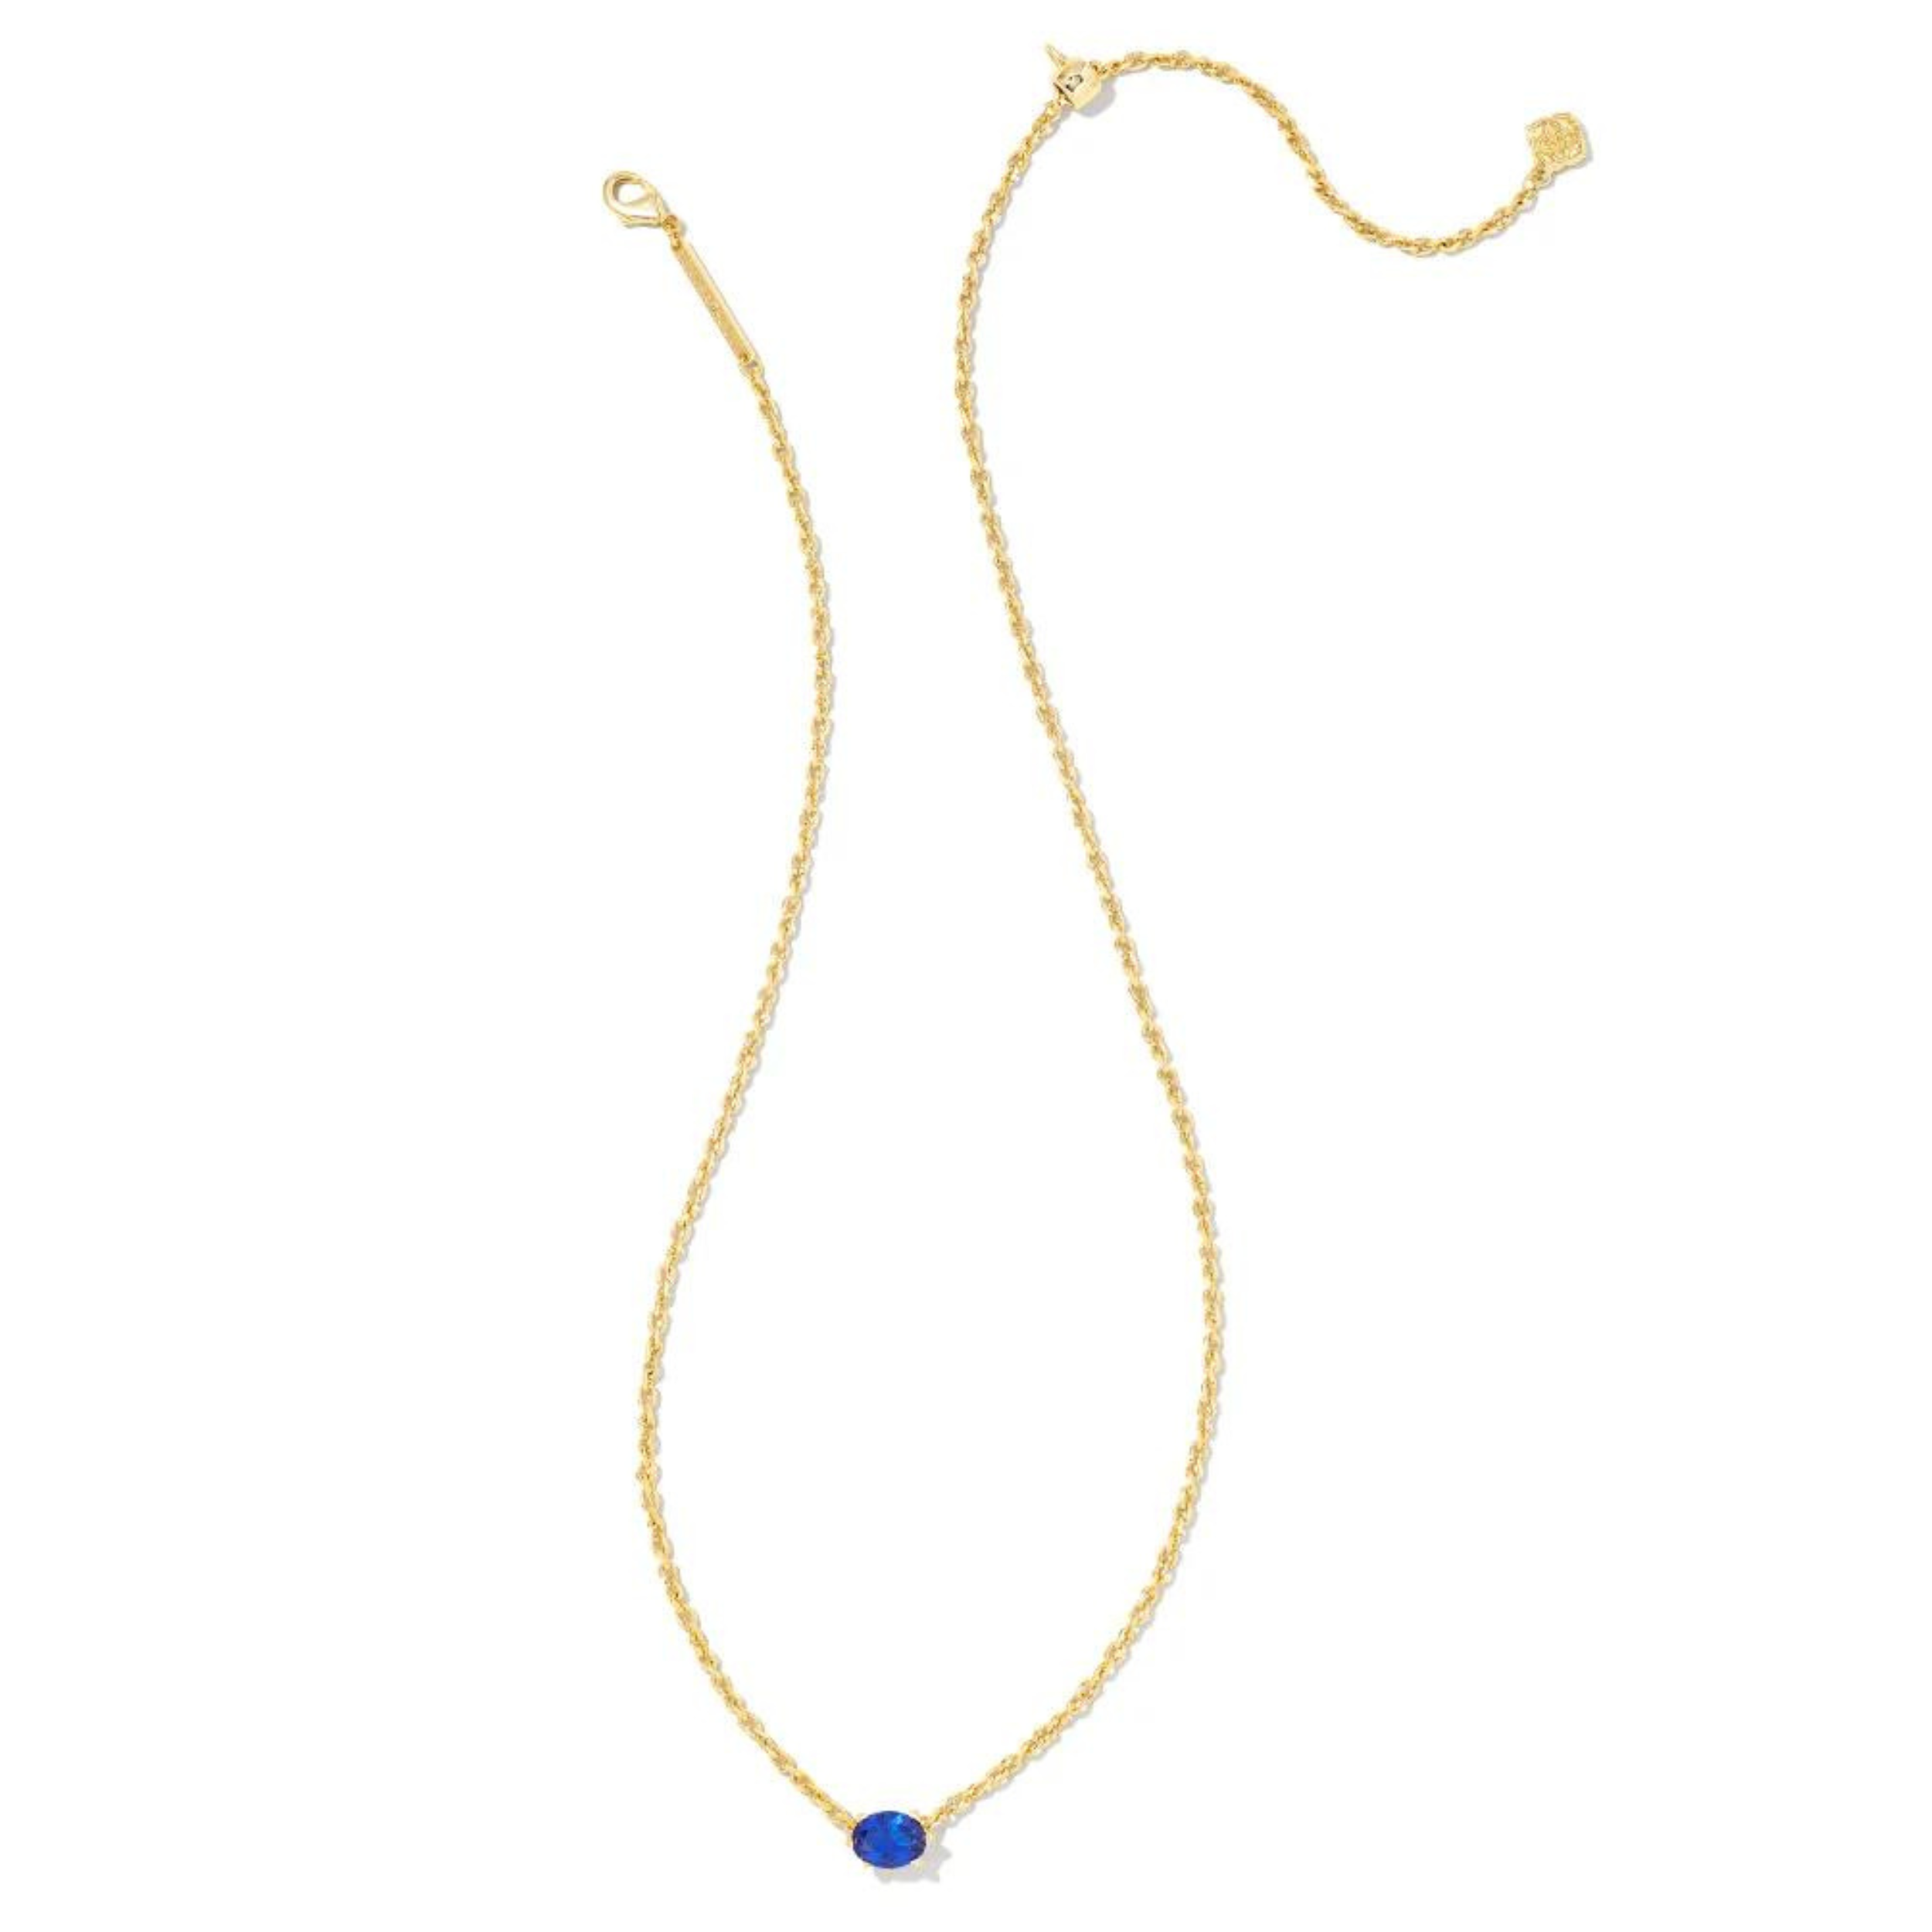 Kendra Scott | Cailin Gold Pendant Necklace in Blue Crystal - Giddy Up Glamour Boutique